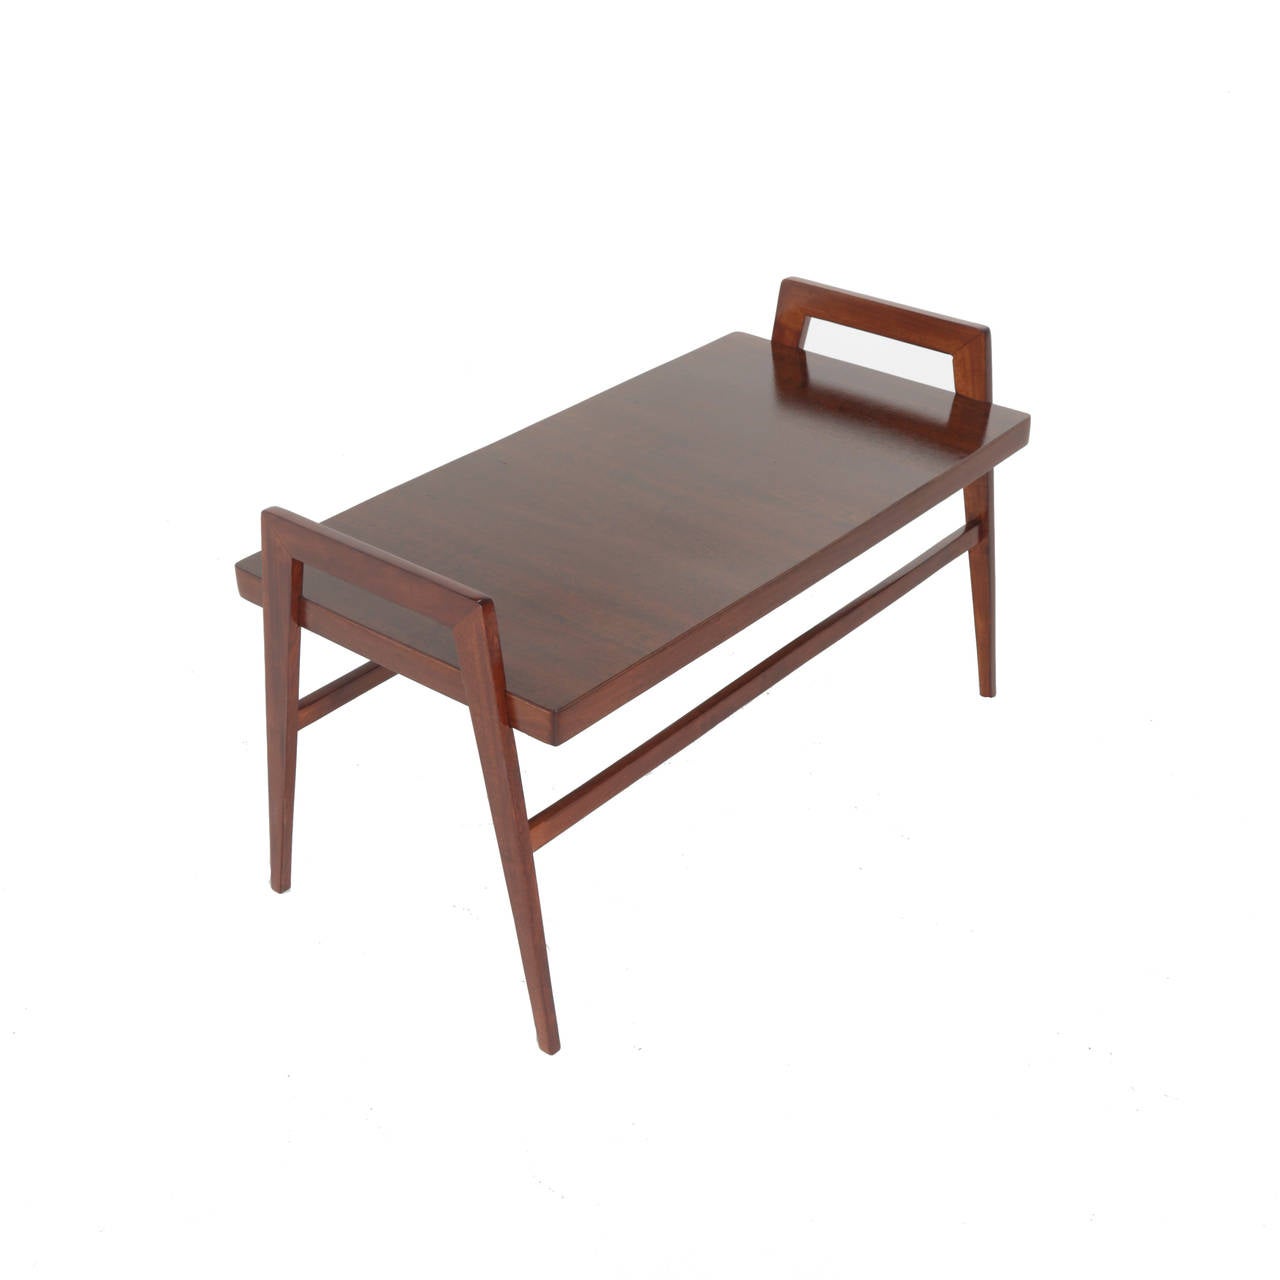 A unique vintage Brazilian side table of Peroba wood with a design that is reminiscent of an elegant tray table. 

 